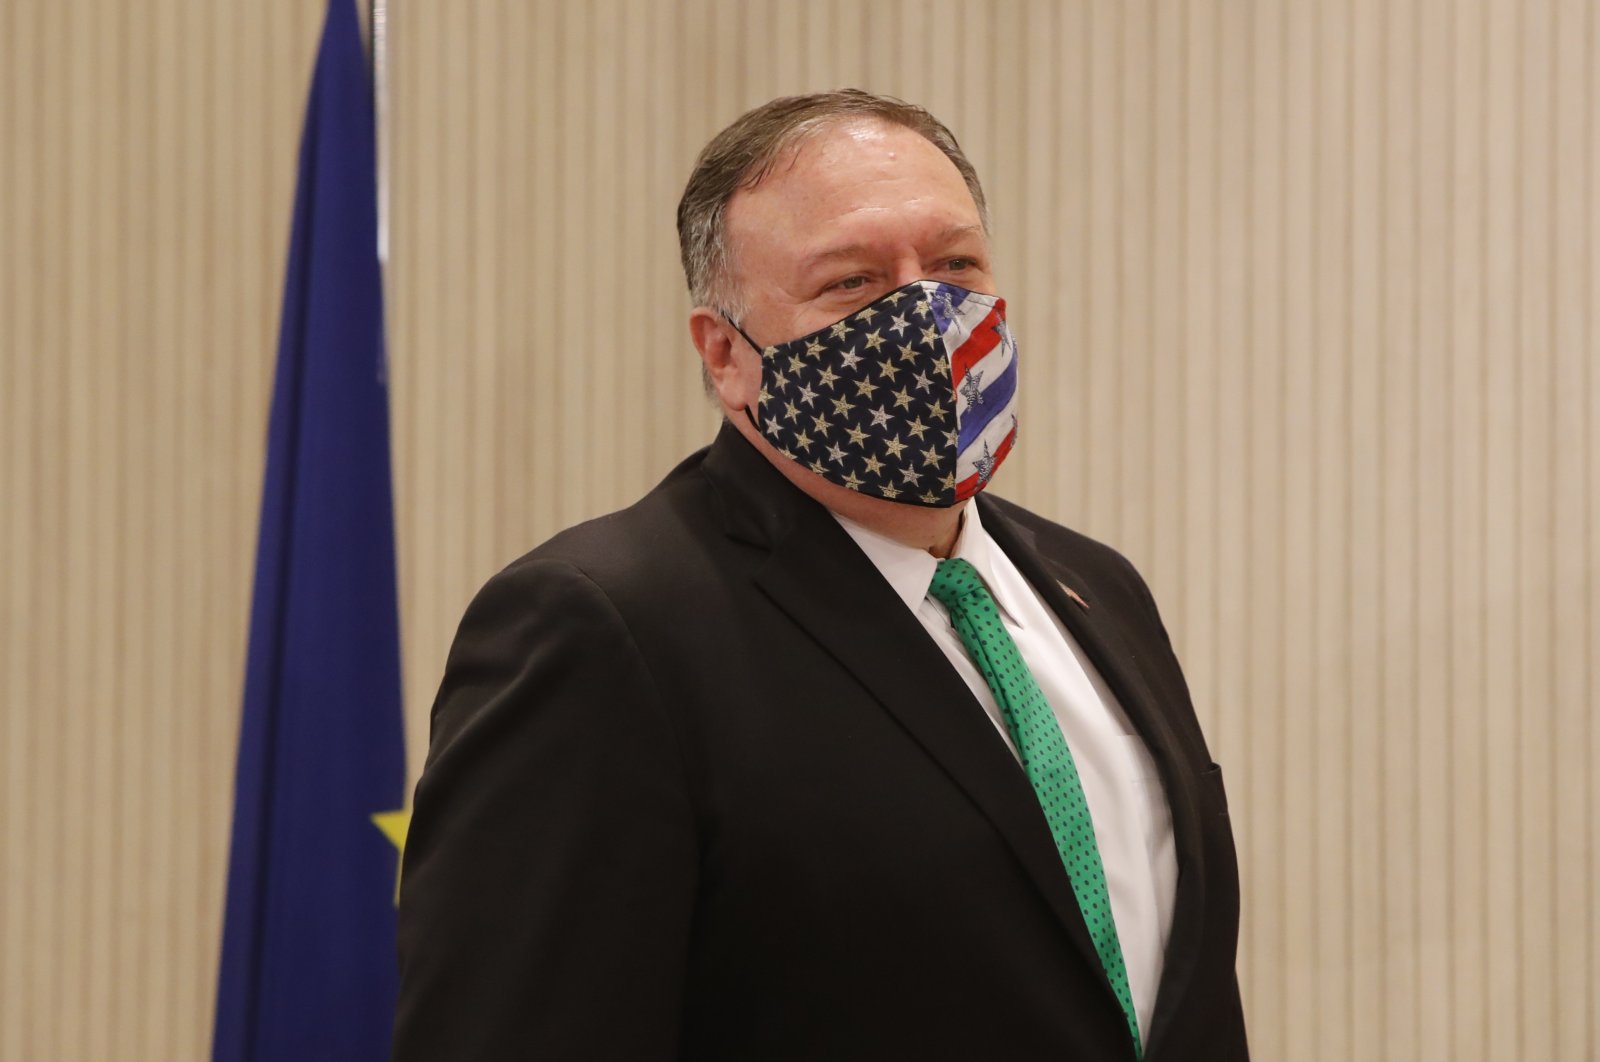 U.S. Secretary of State Mike Pompeo arrives for a press conference with the Cypriot President Nicos Anastasiades at the Presidential Palace in Nicosia, Cyprus, Saturday, Sept. 12, 2020. (AP Photo)